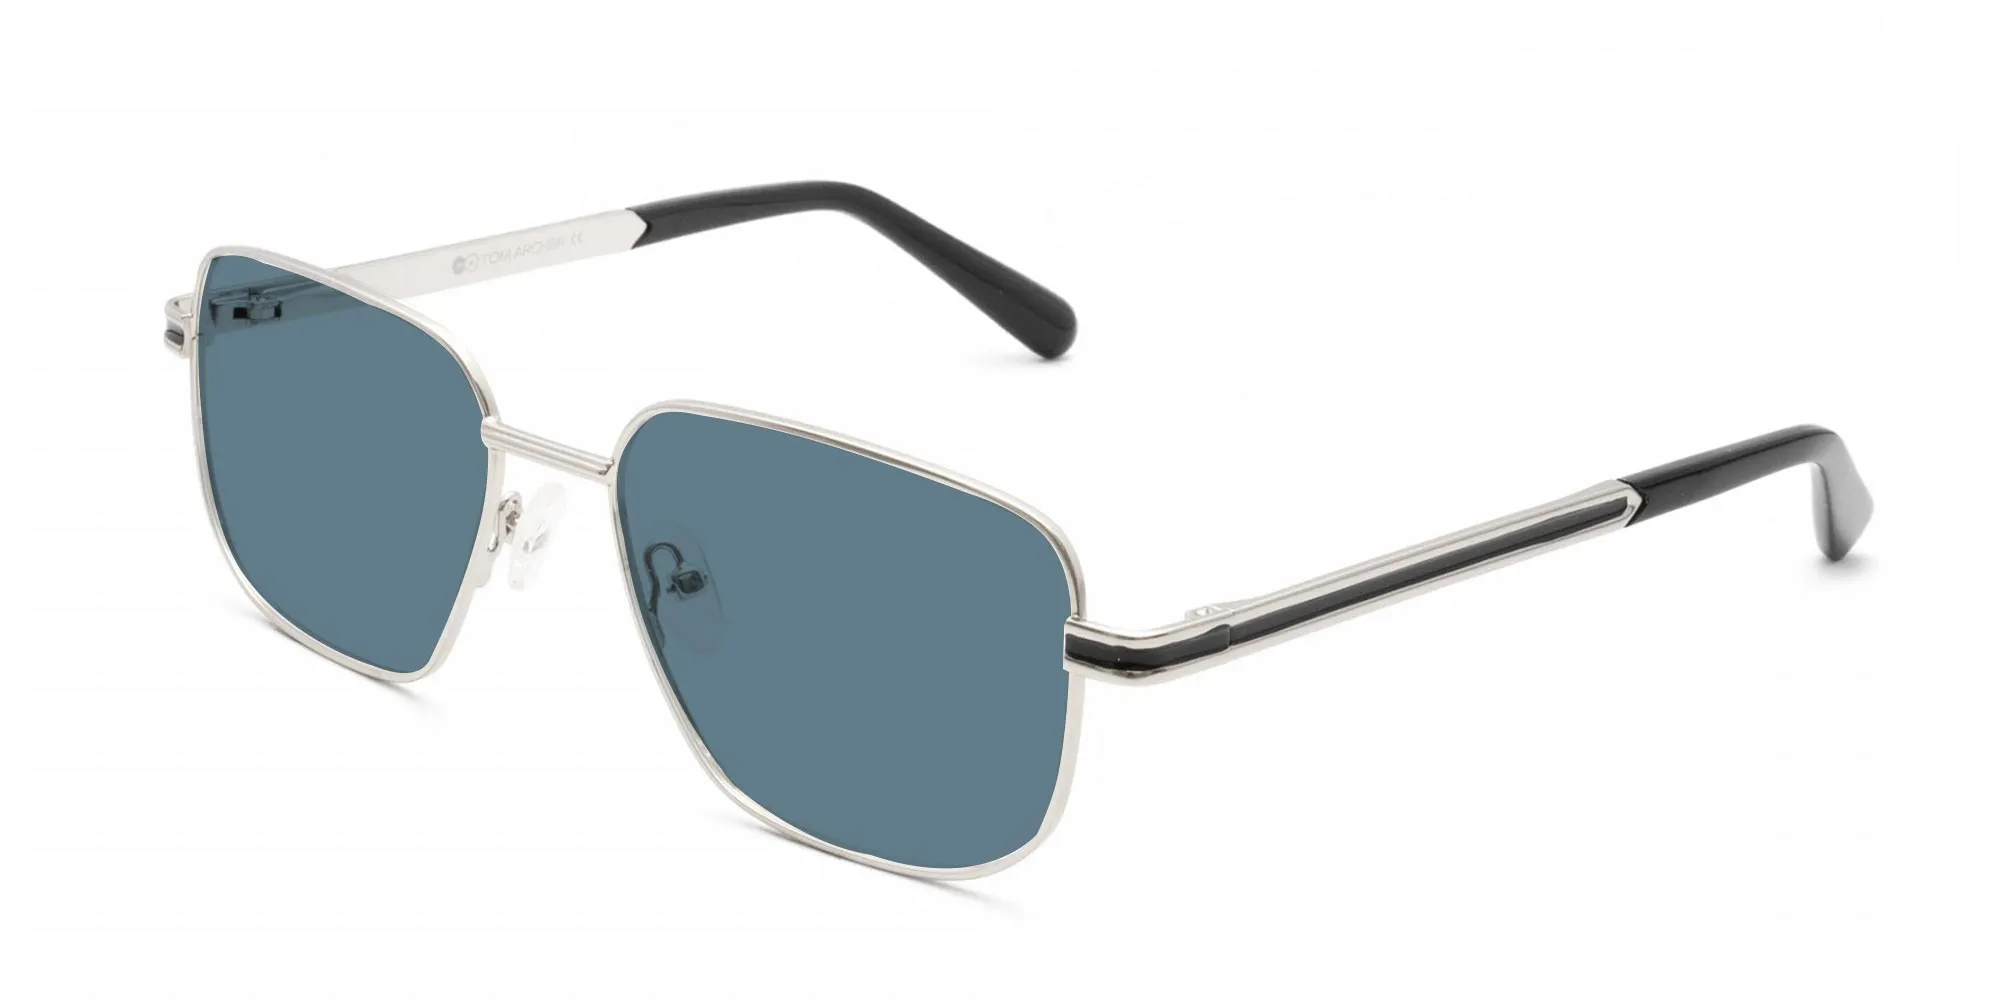 Silver Metal Sunglasses With Blue Tint-2